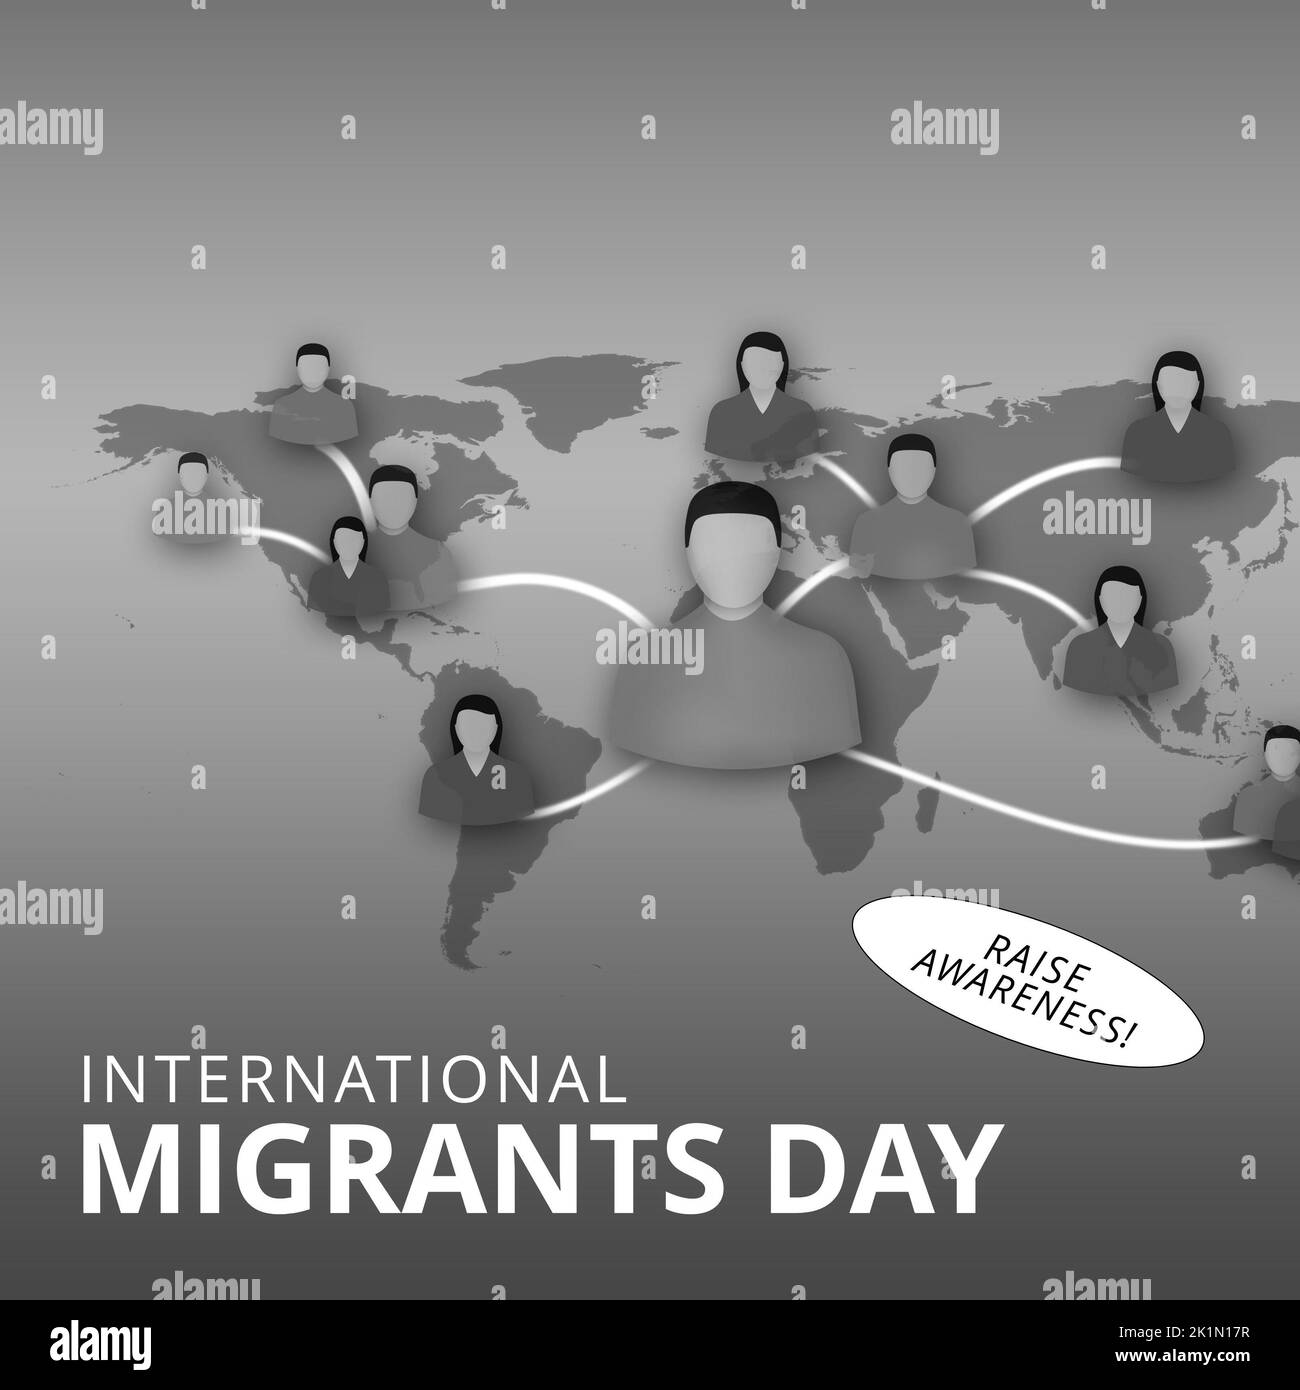 Composition of international migrants day text over network of people icons on world map Stock Photo